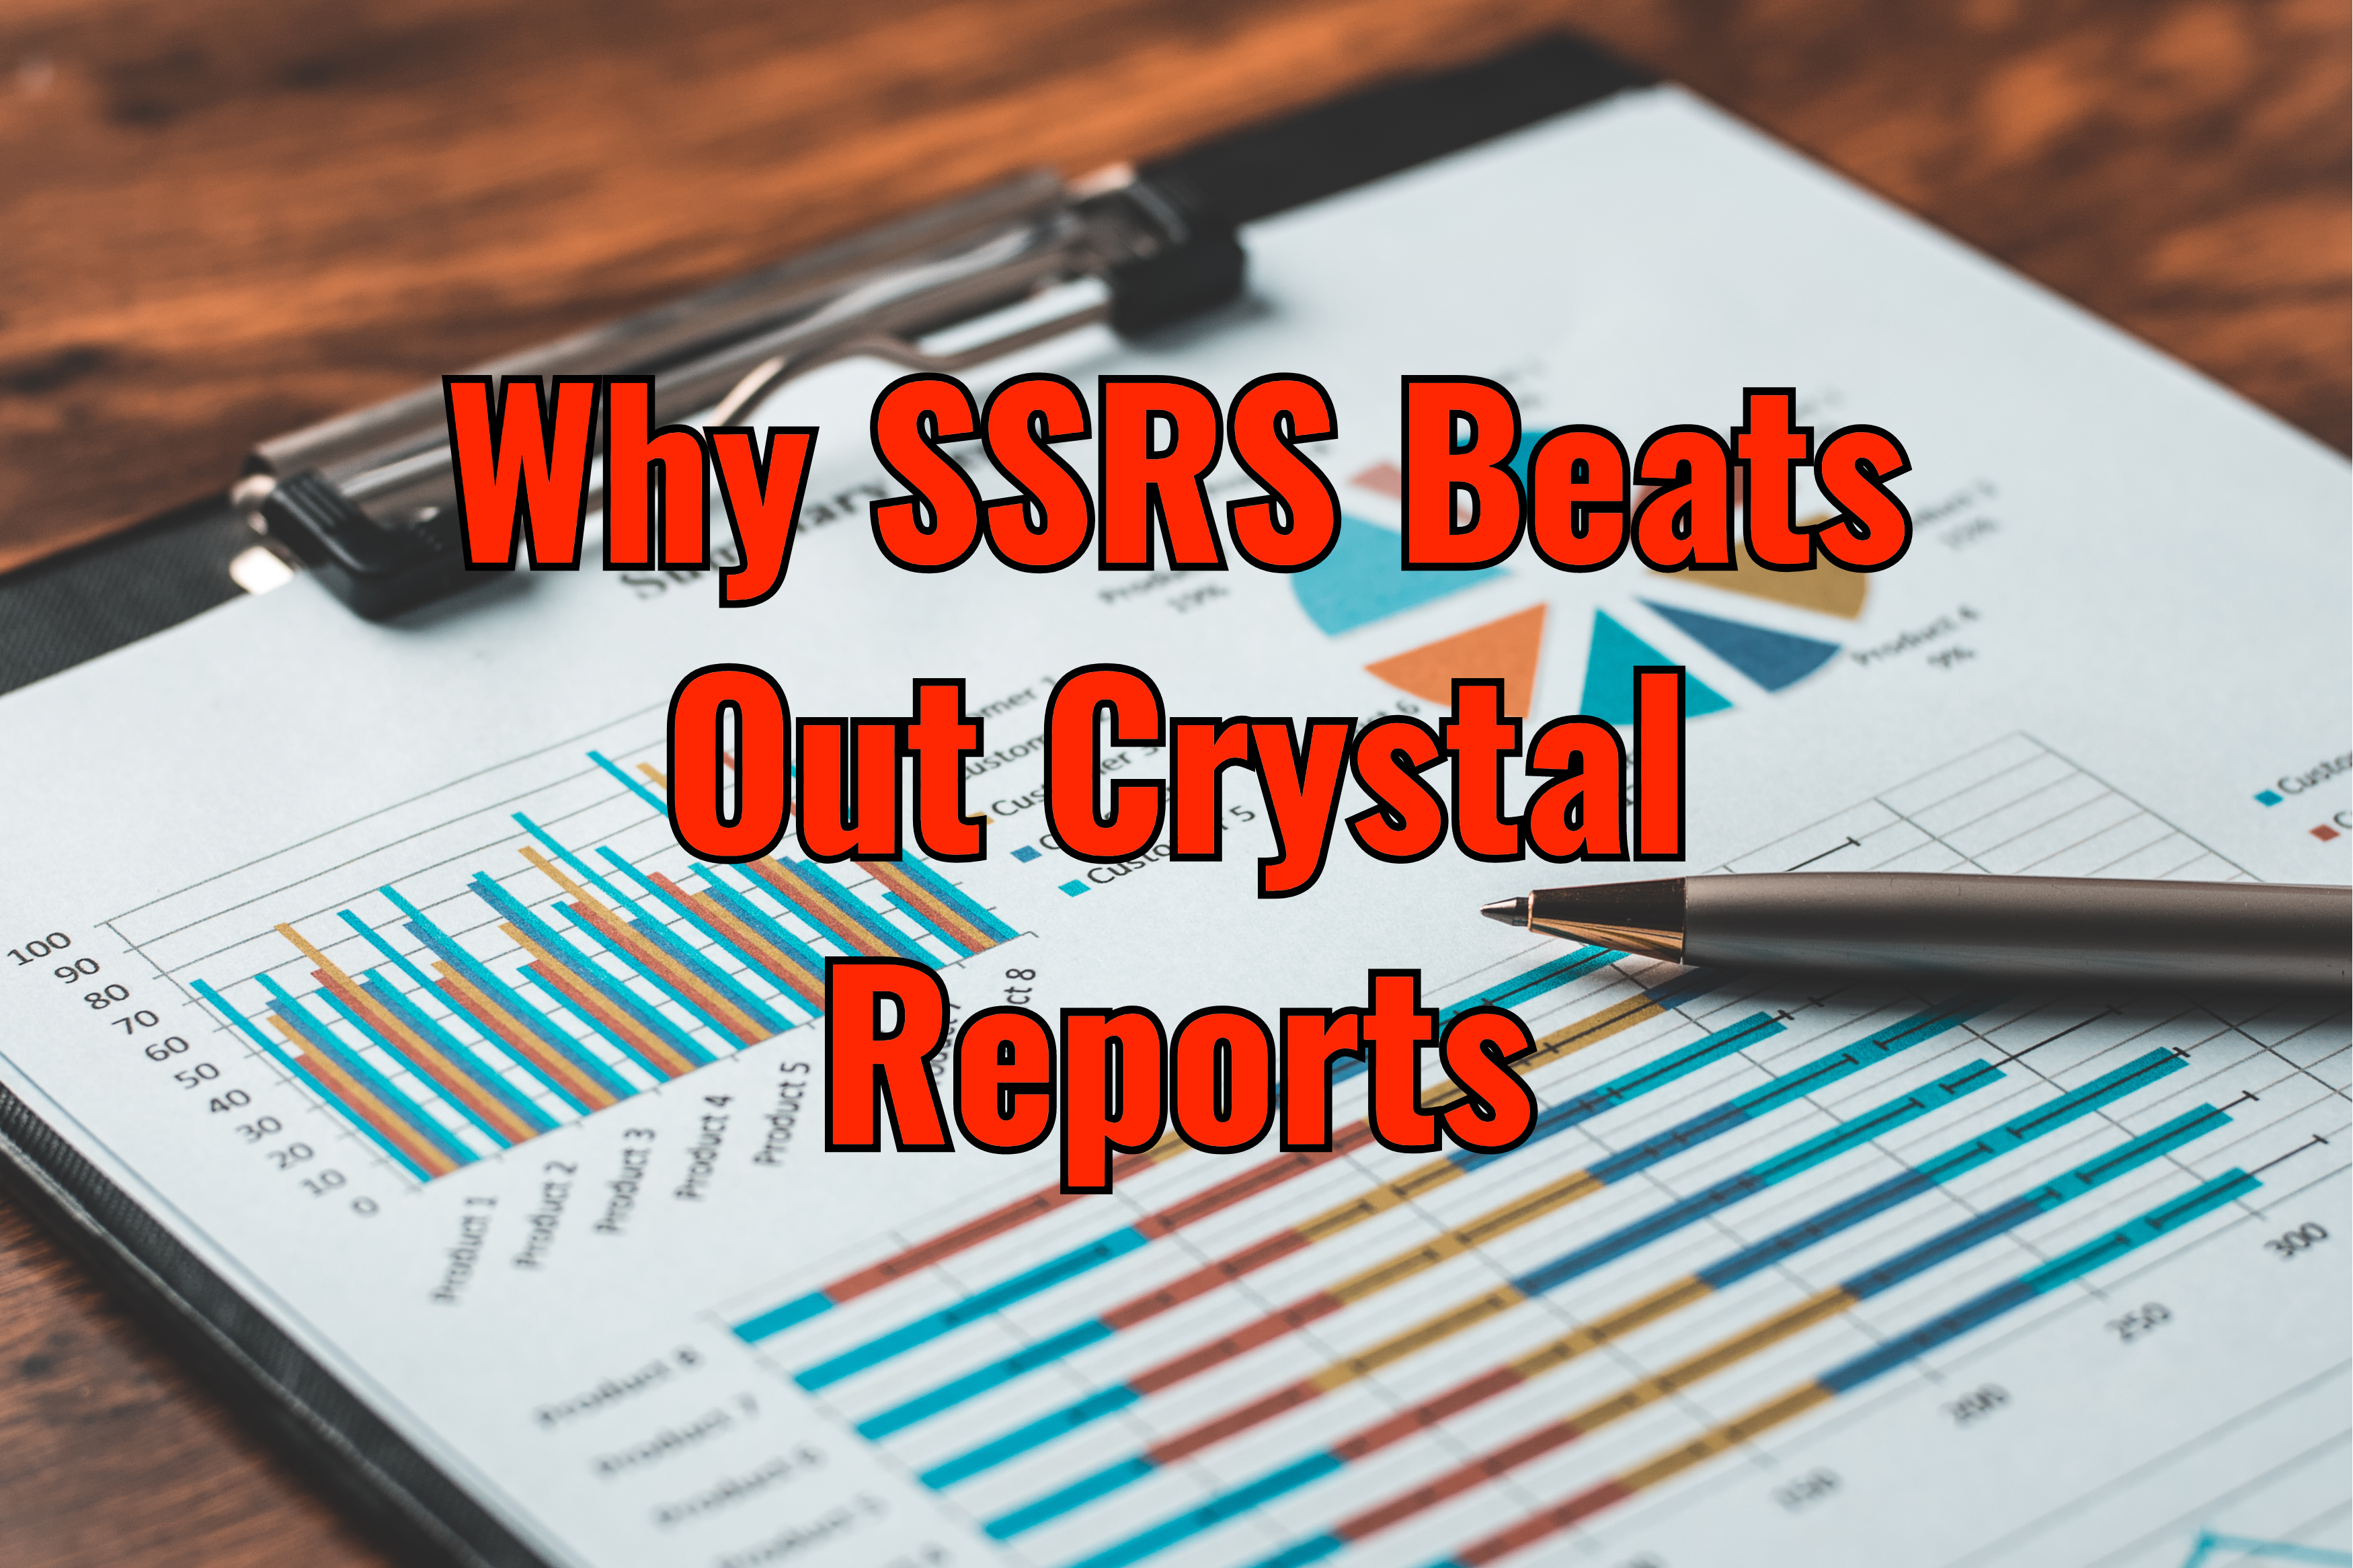 Why SSRS Beats Out Crystal Reports